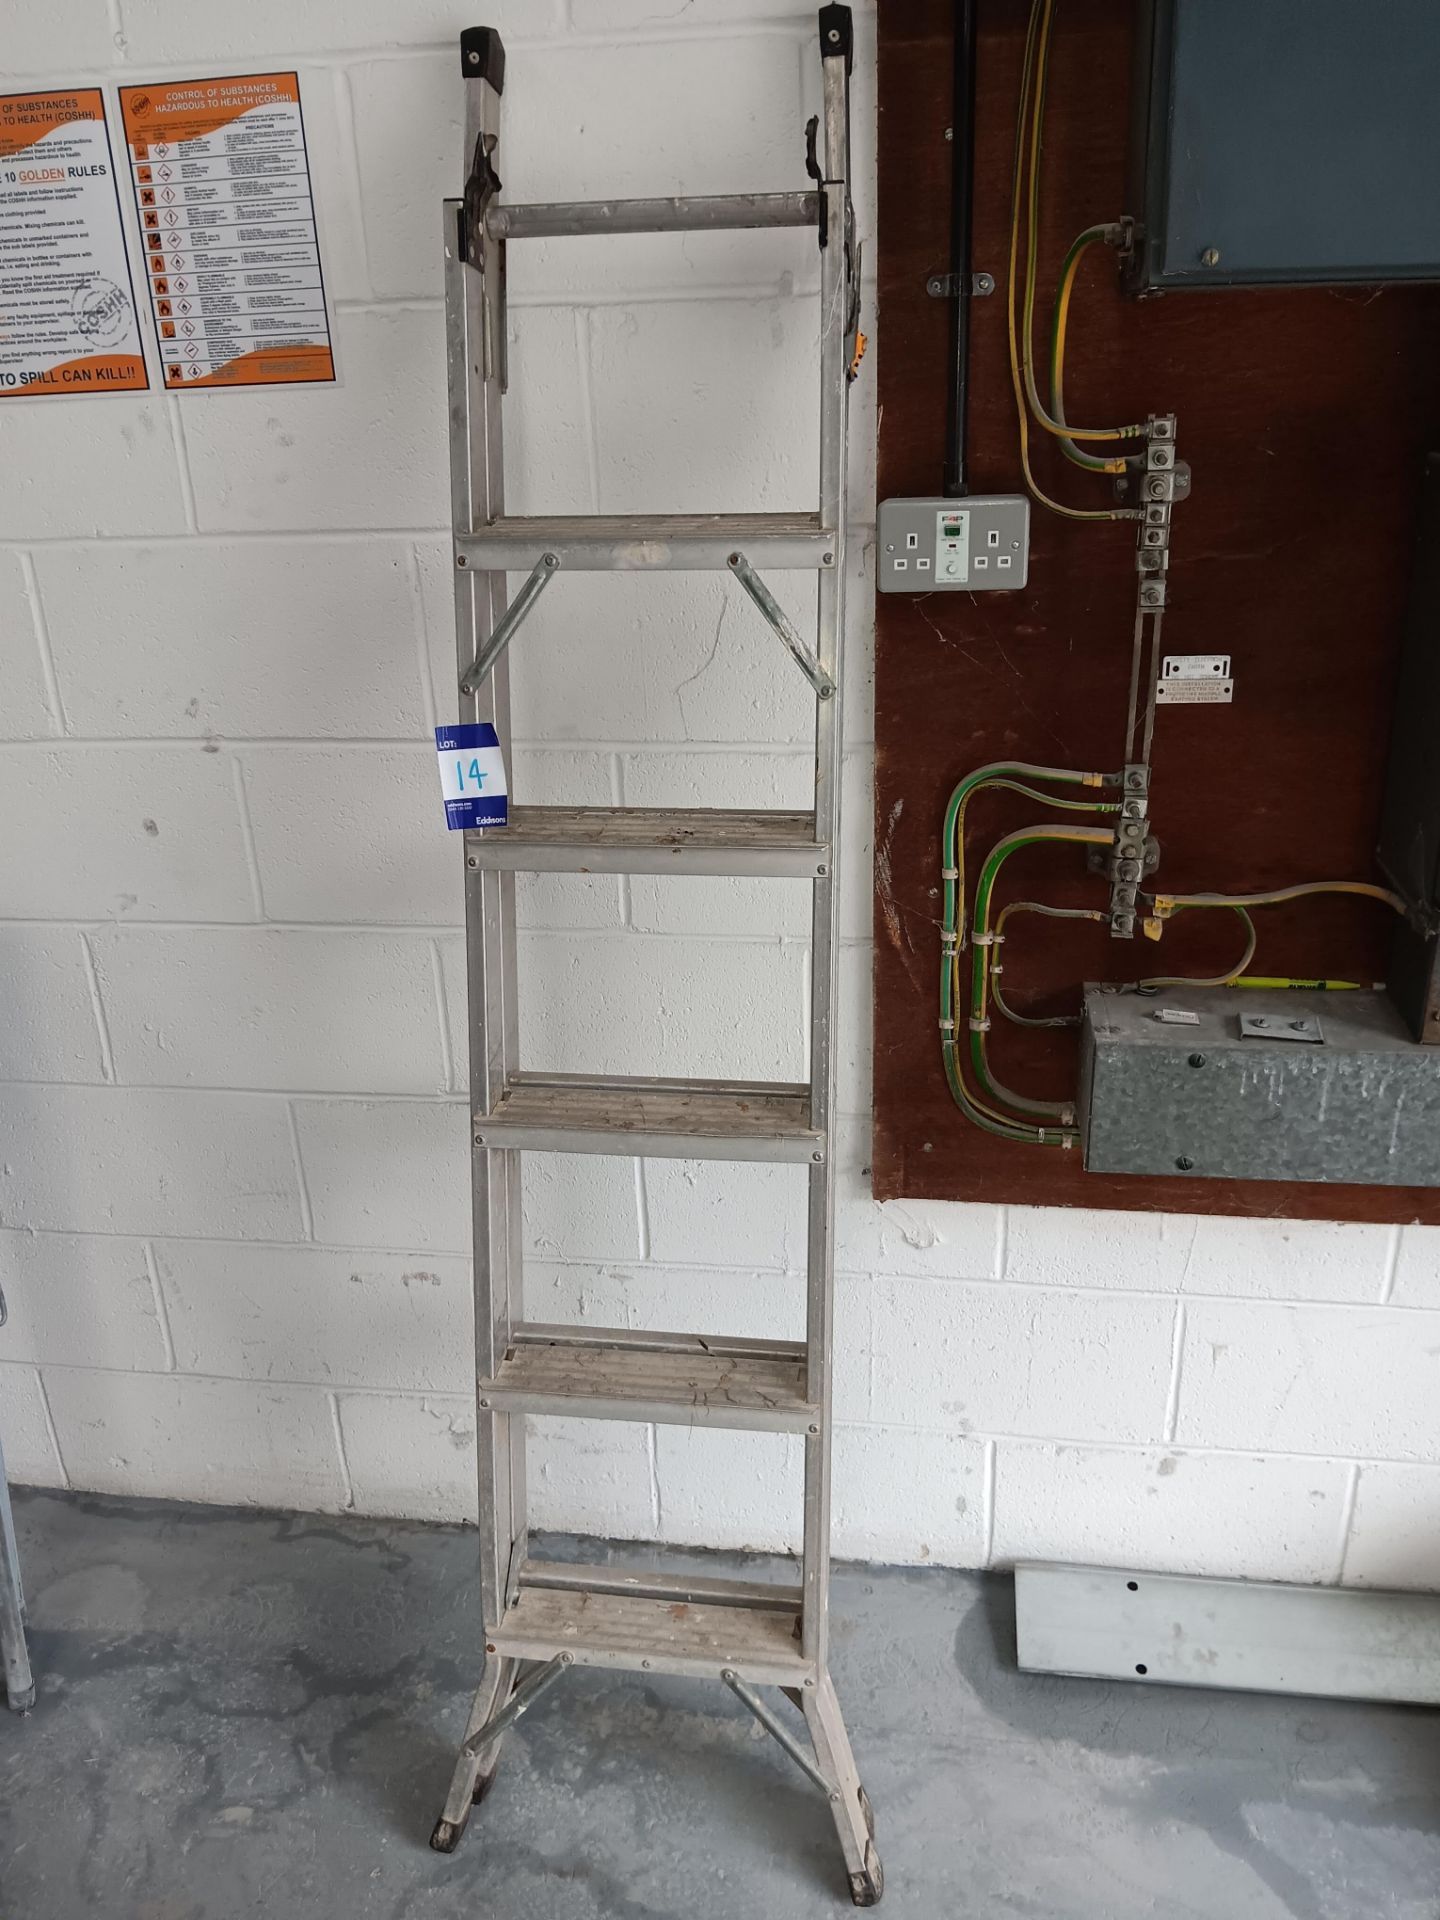 Aluminium twin section extension ladder and a Werner pro platform - Image 2 of 3